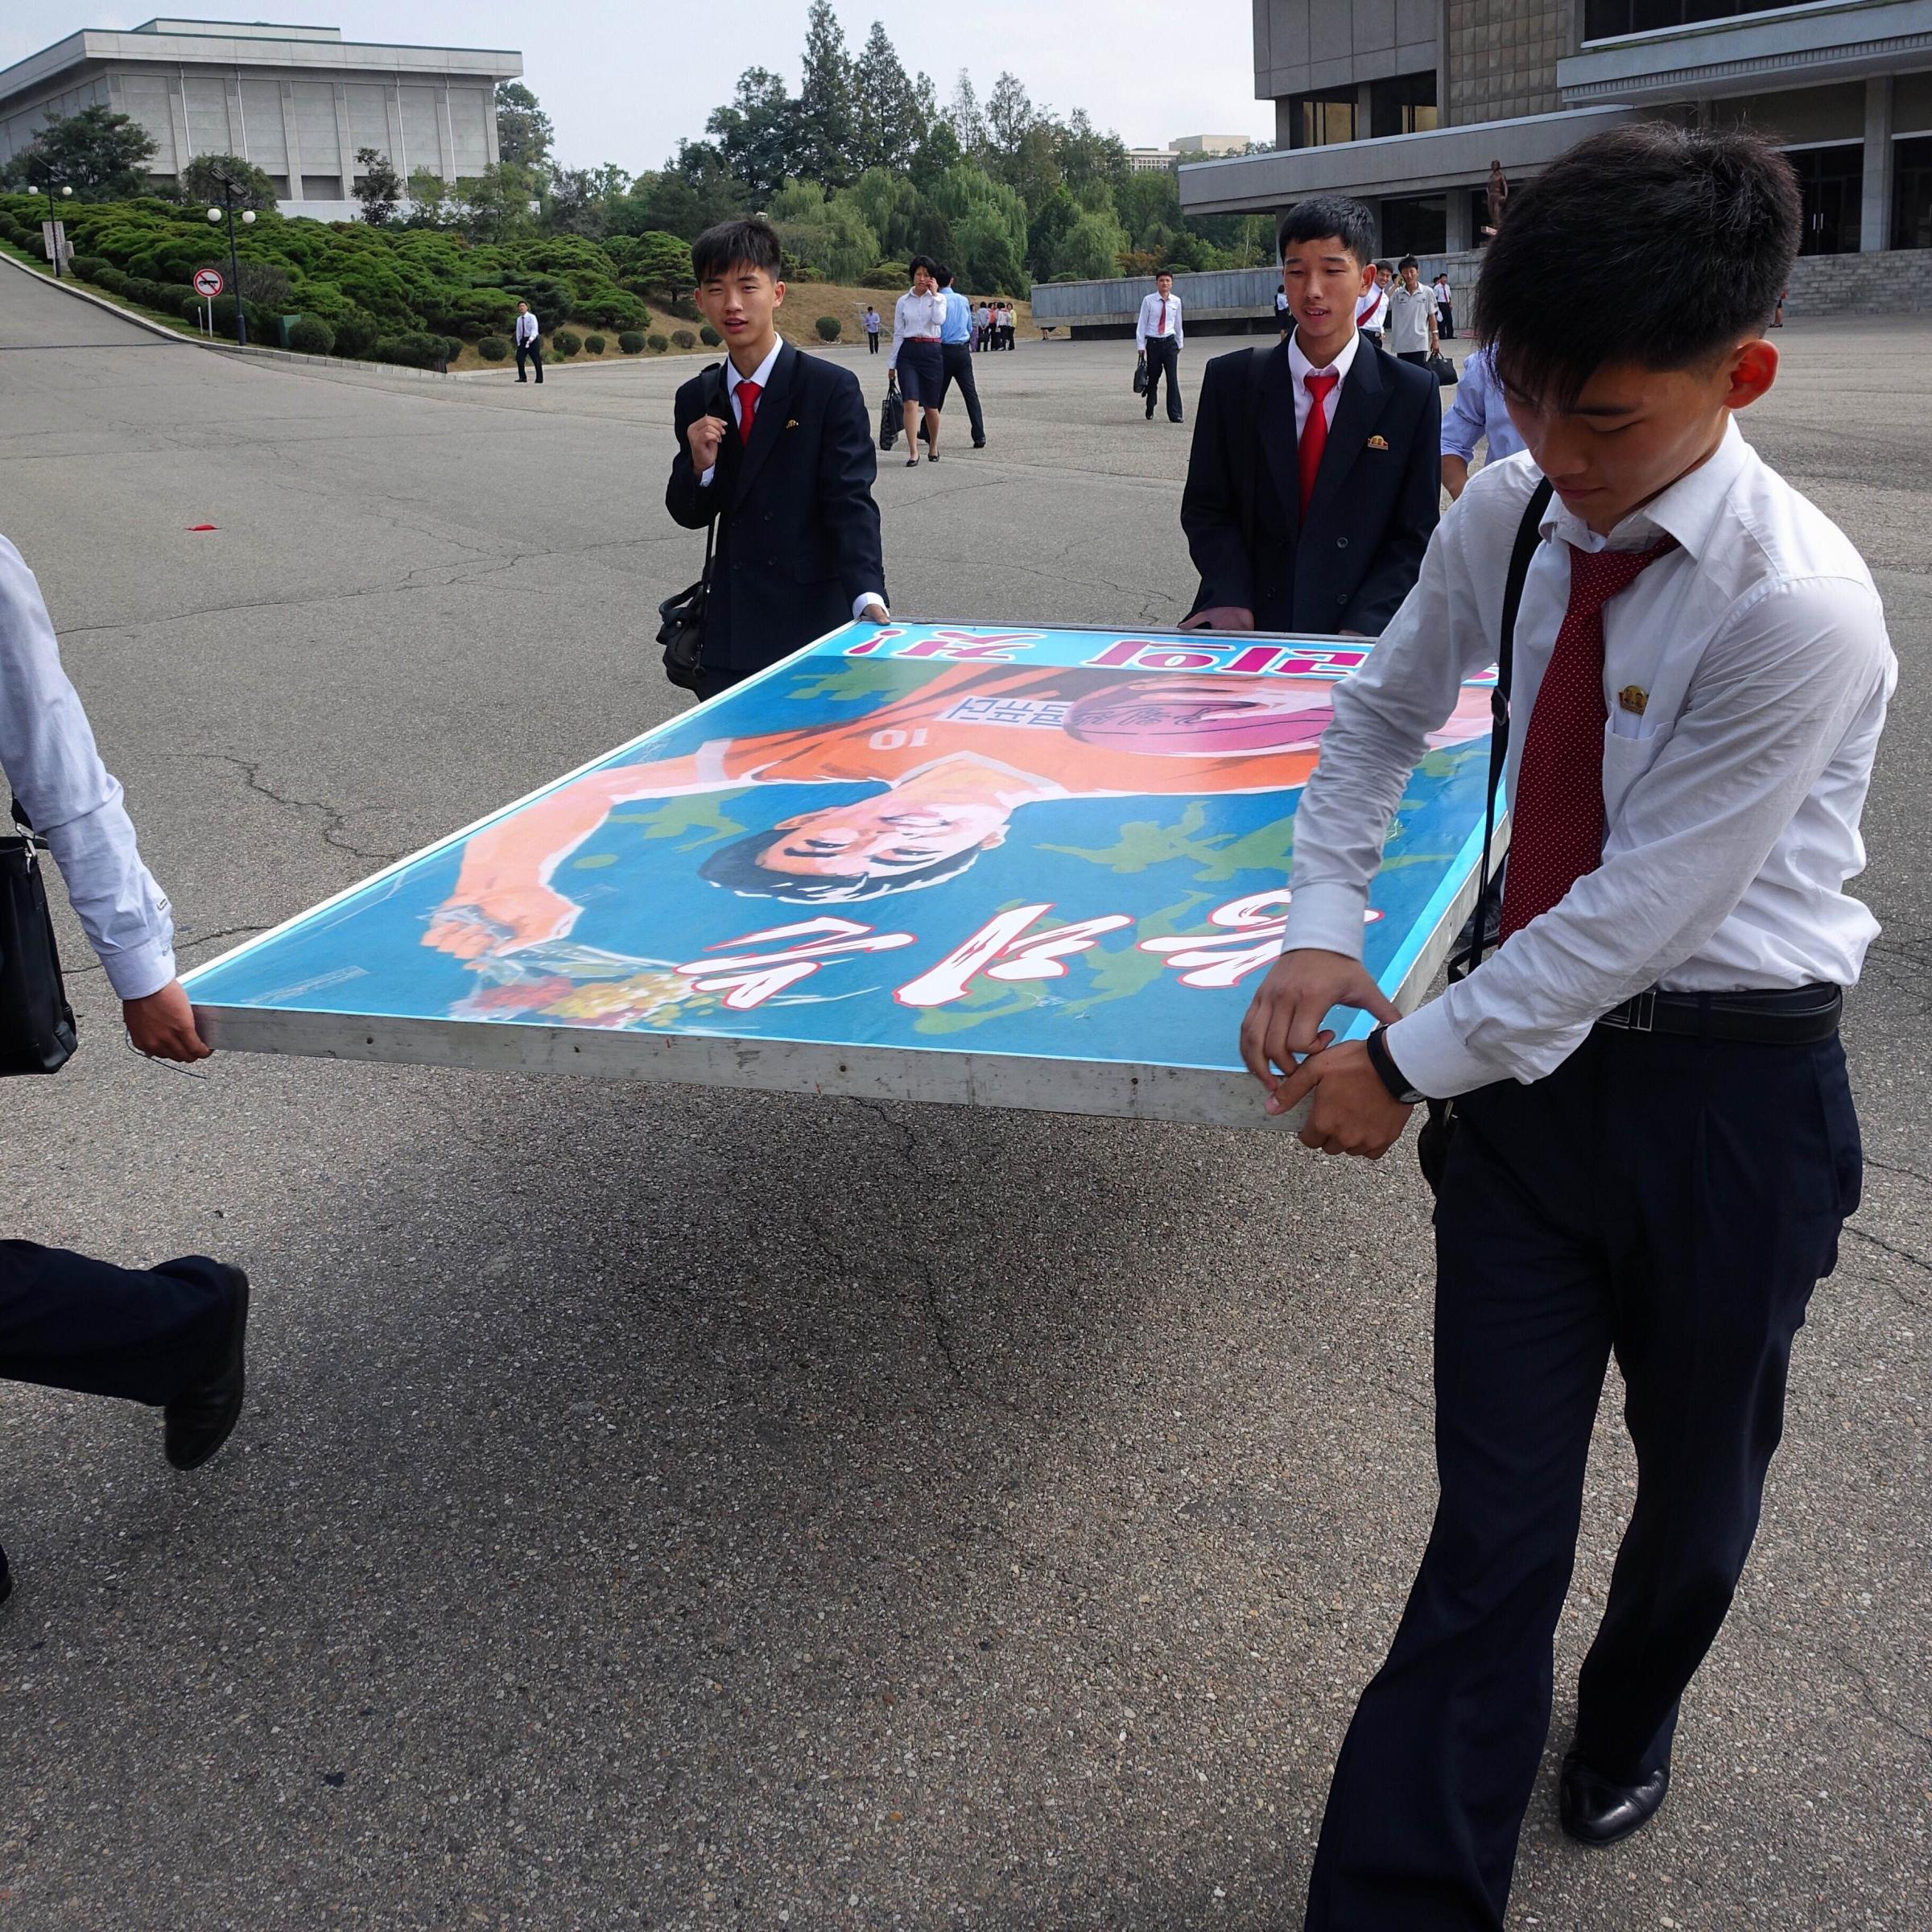 Computer Science students of Kim Il Sung University carry a poster board that says "Victory is Ours!" during the school's 78th anniversary celebrations.